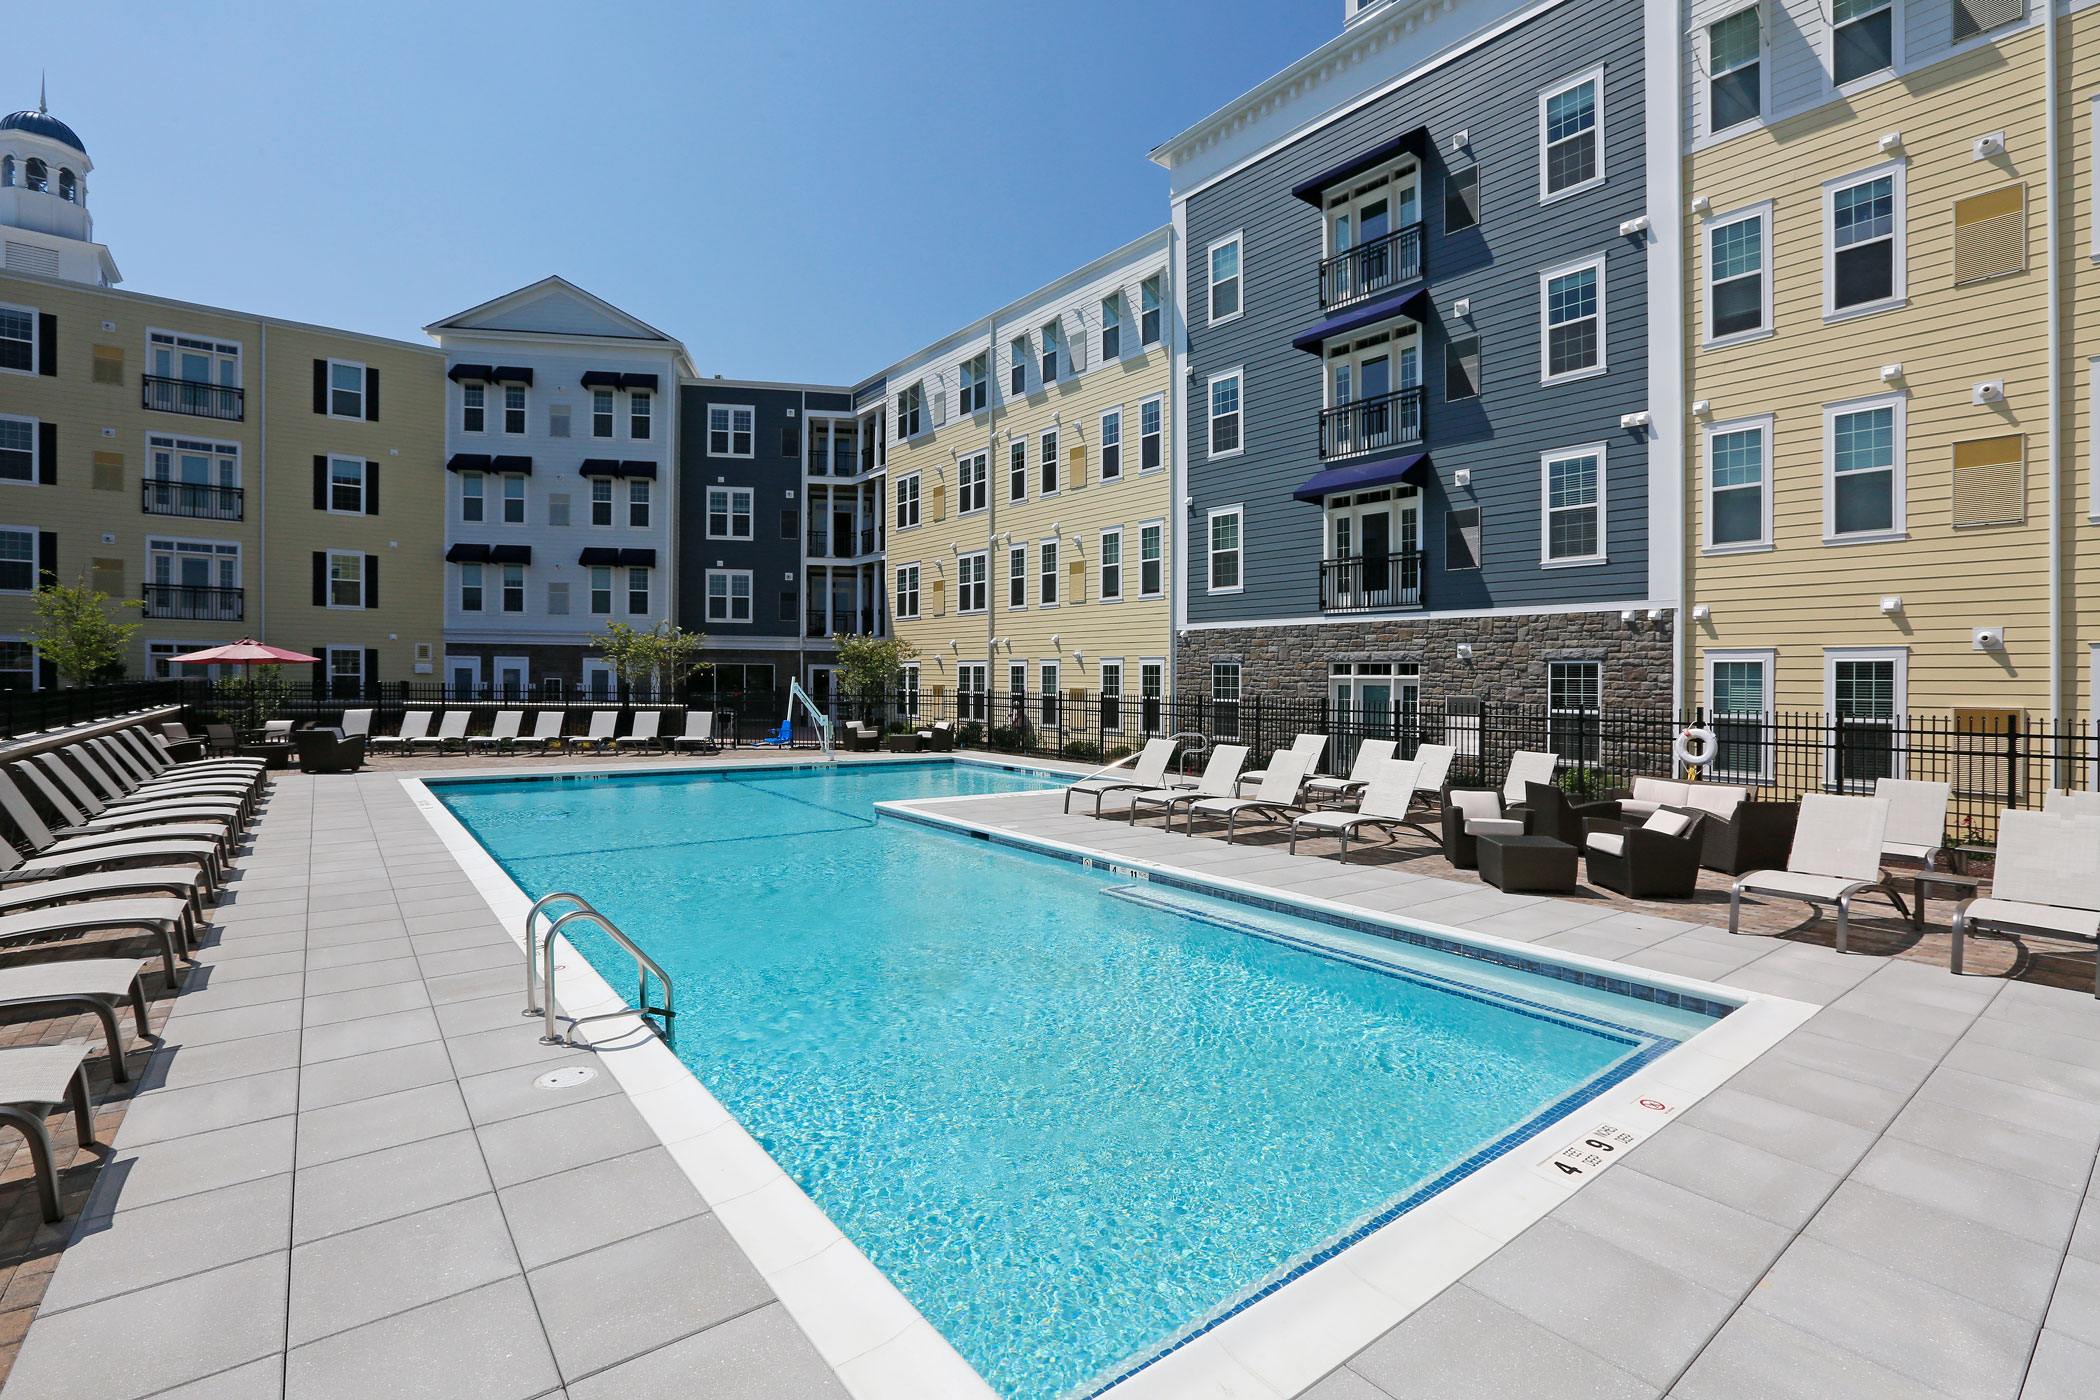 An outside view of an L shaped pool surrounded by pool chairs, and apartments with windows.